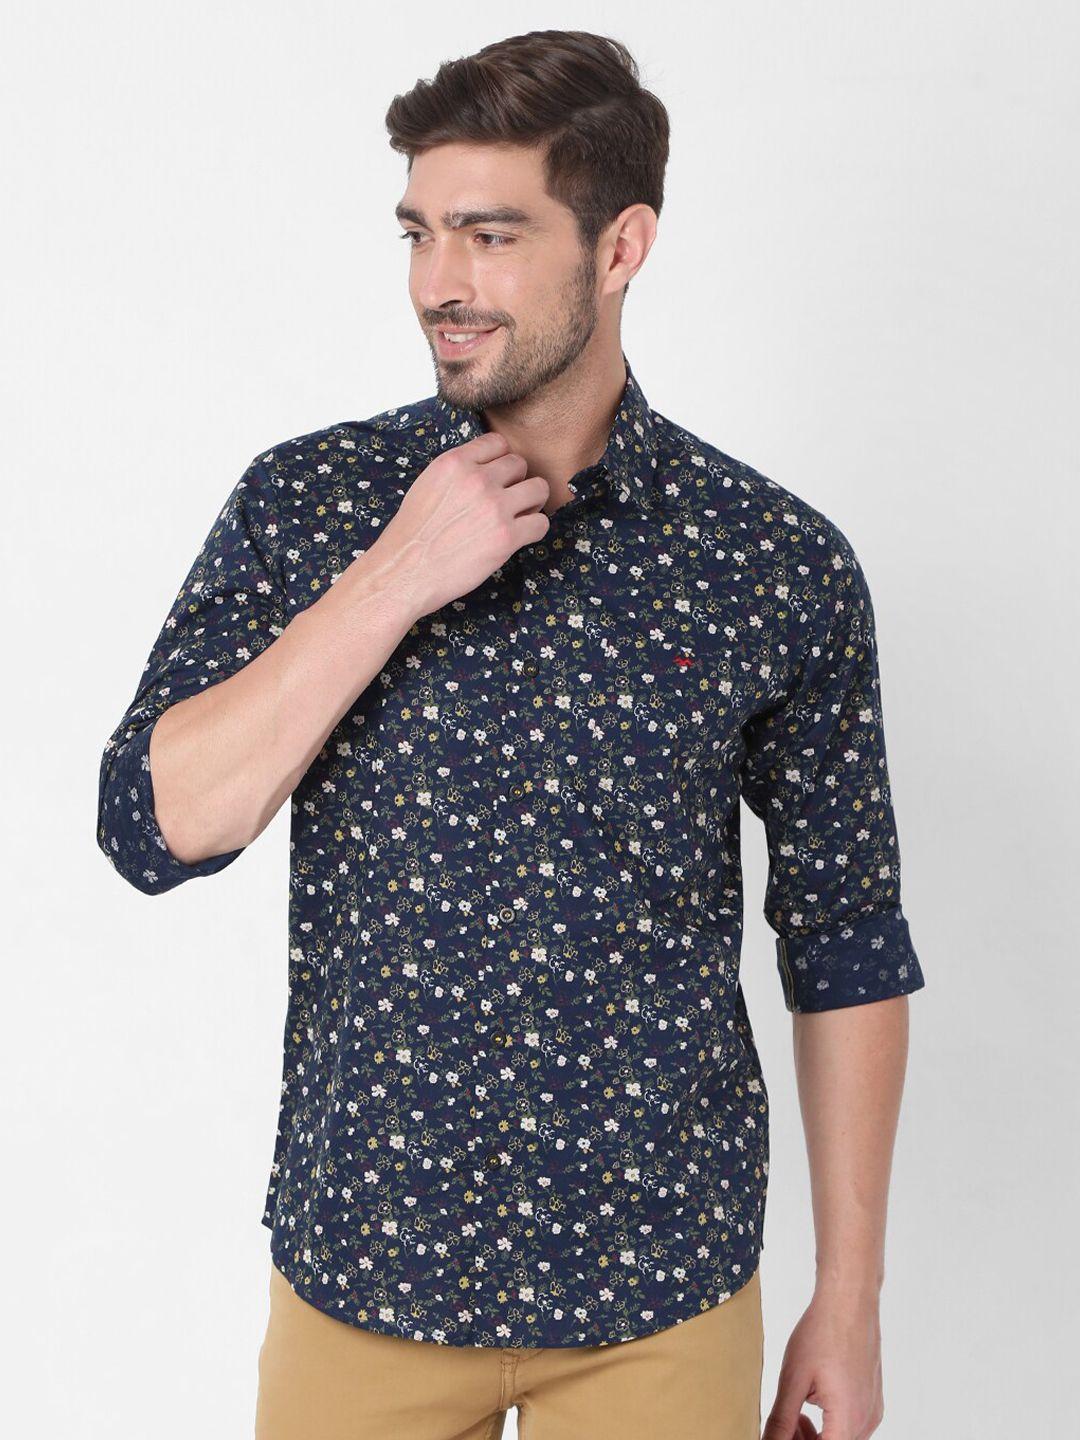 mufti men navy blue slim fit floral printed casual shirt